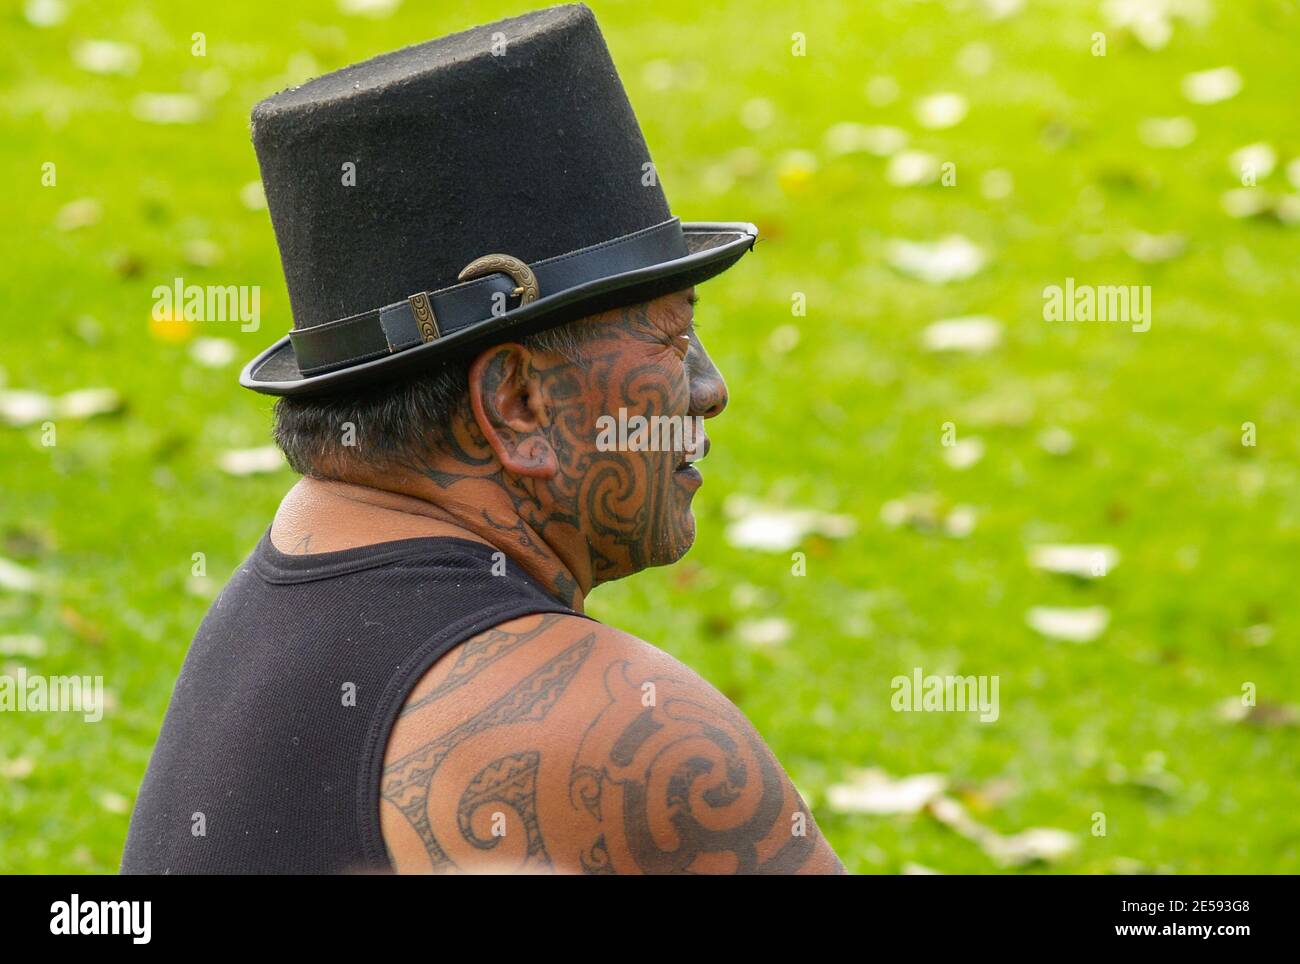 TAURANGA, NEW ZEALAND - April 3 2020; ; Maori male with traditionally heavily tattooed face and arm wearing top hat profile portrait. Stock Photo